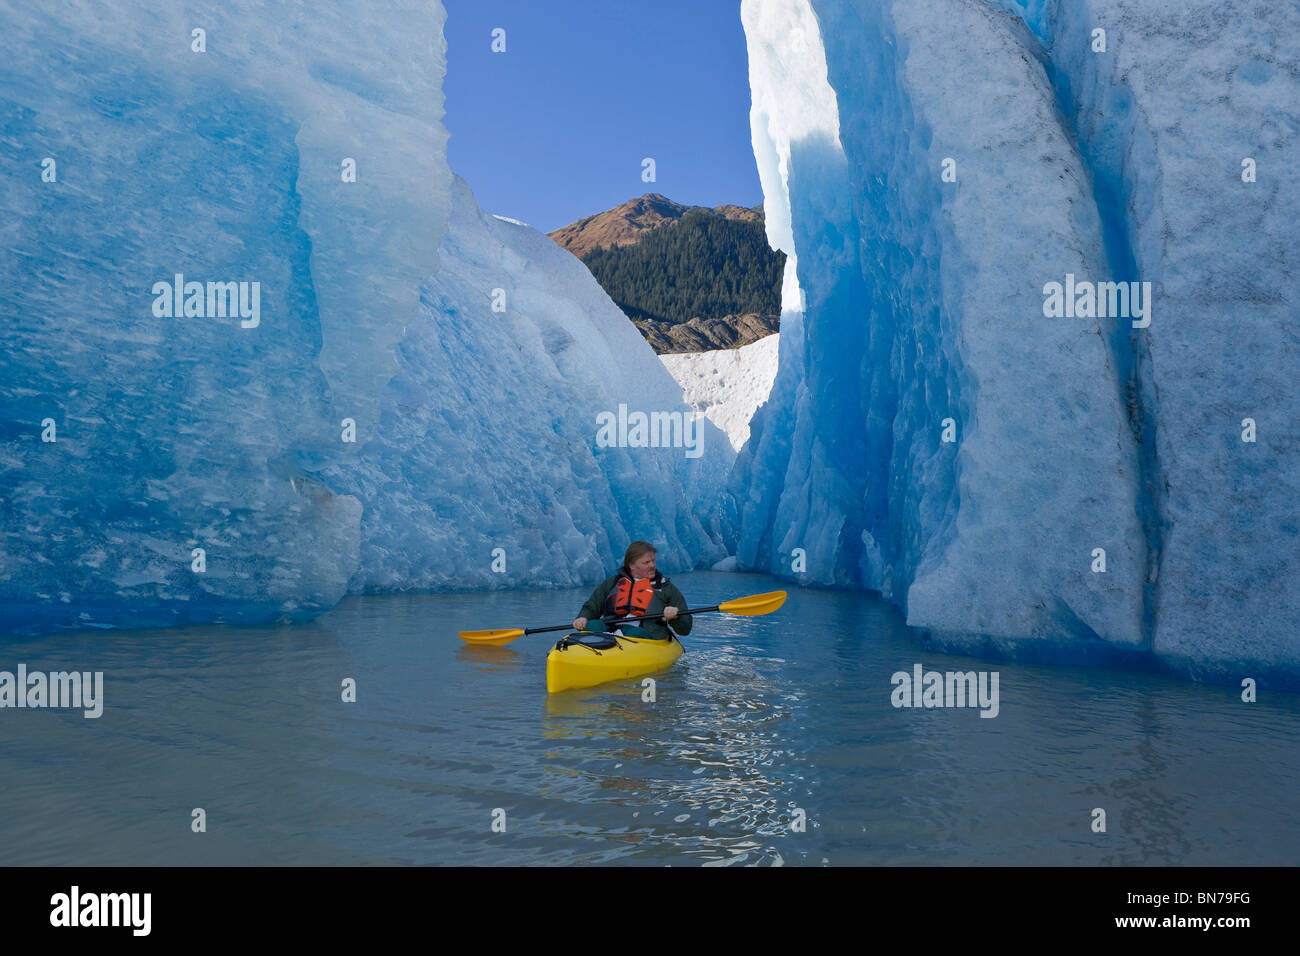 A kayaker paddles and explores the seracs of Mendenhall Glacier, Autumn morning, Mt. McGinnis in the background, Alaska Stock Photo